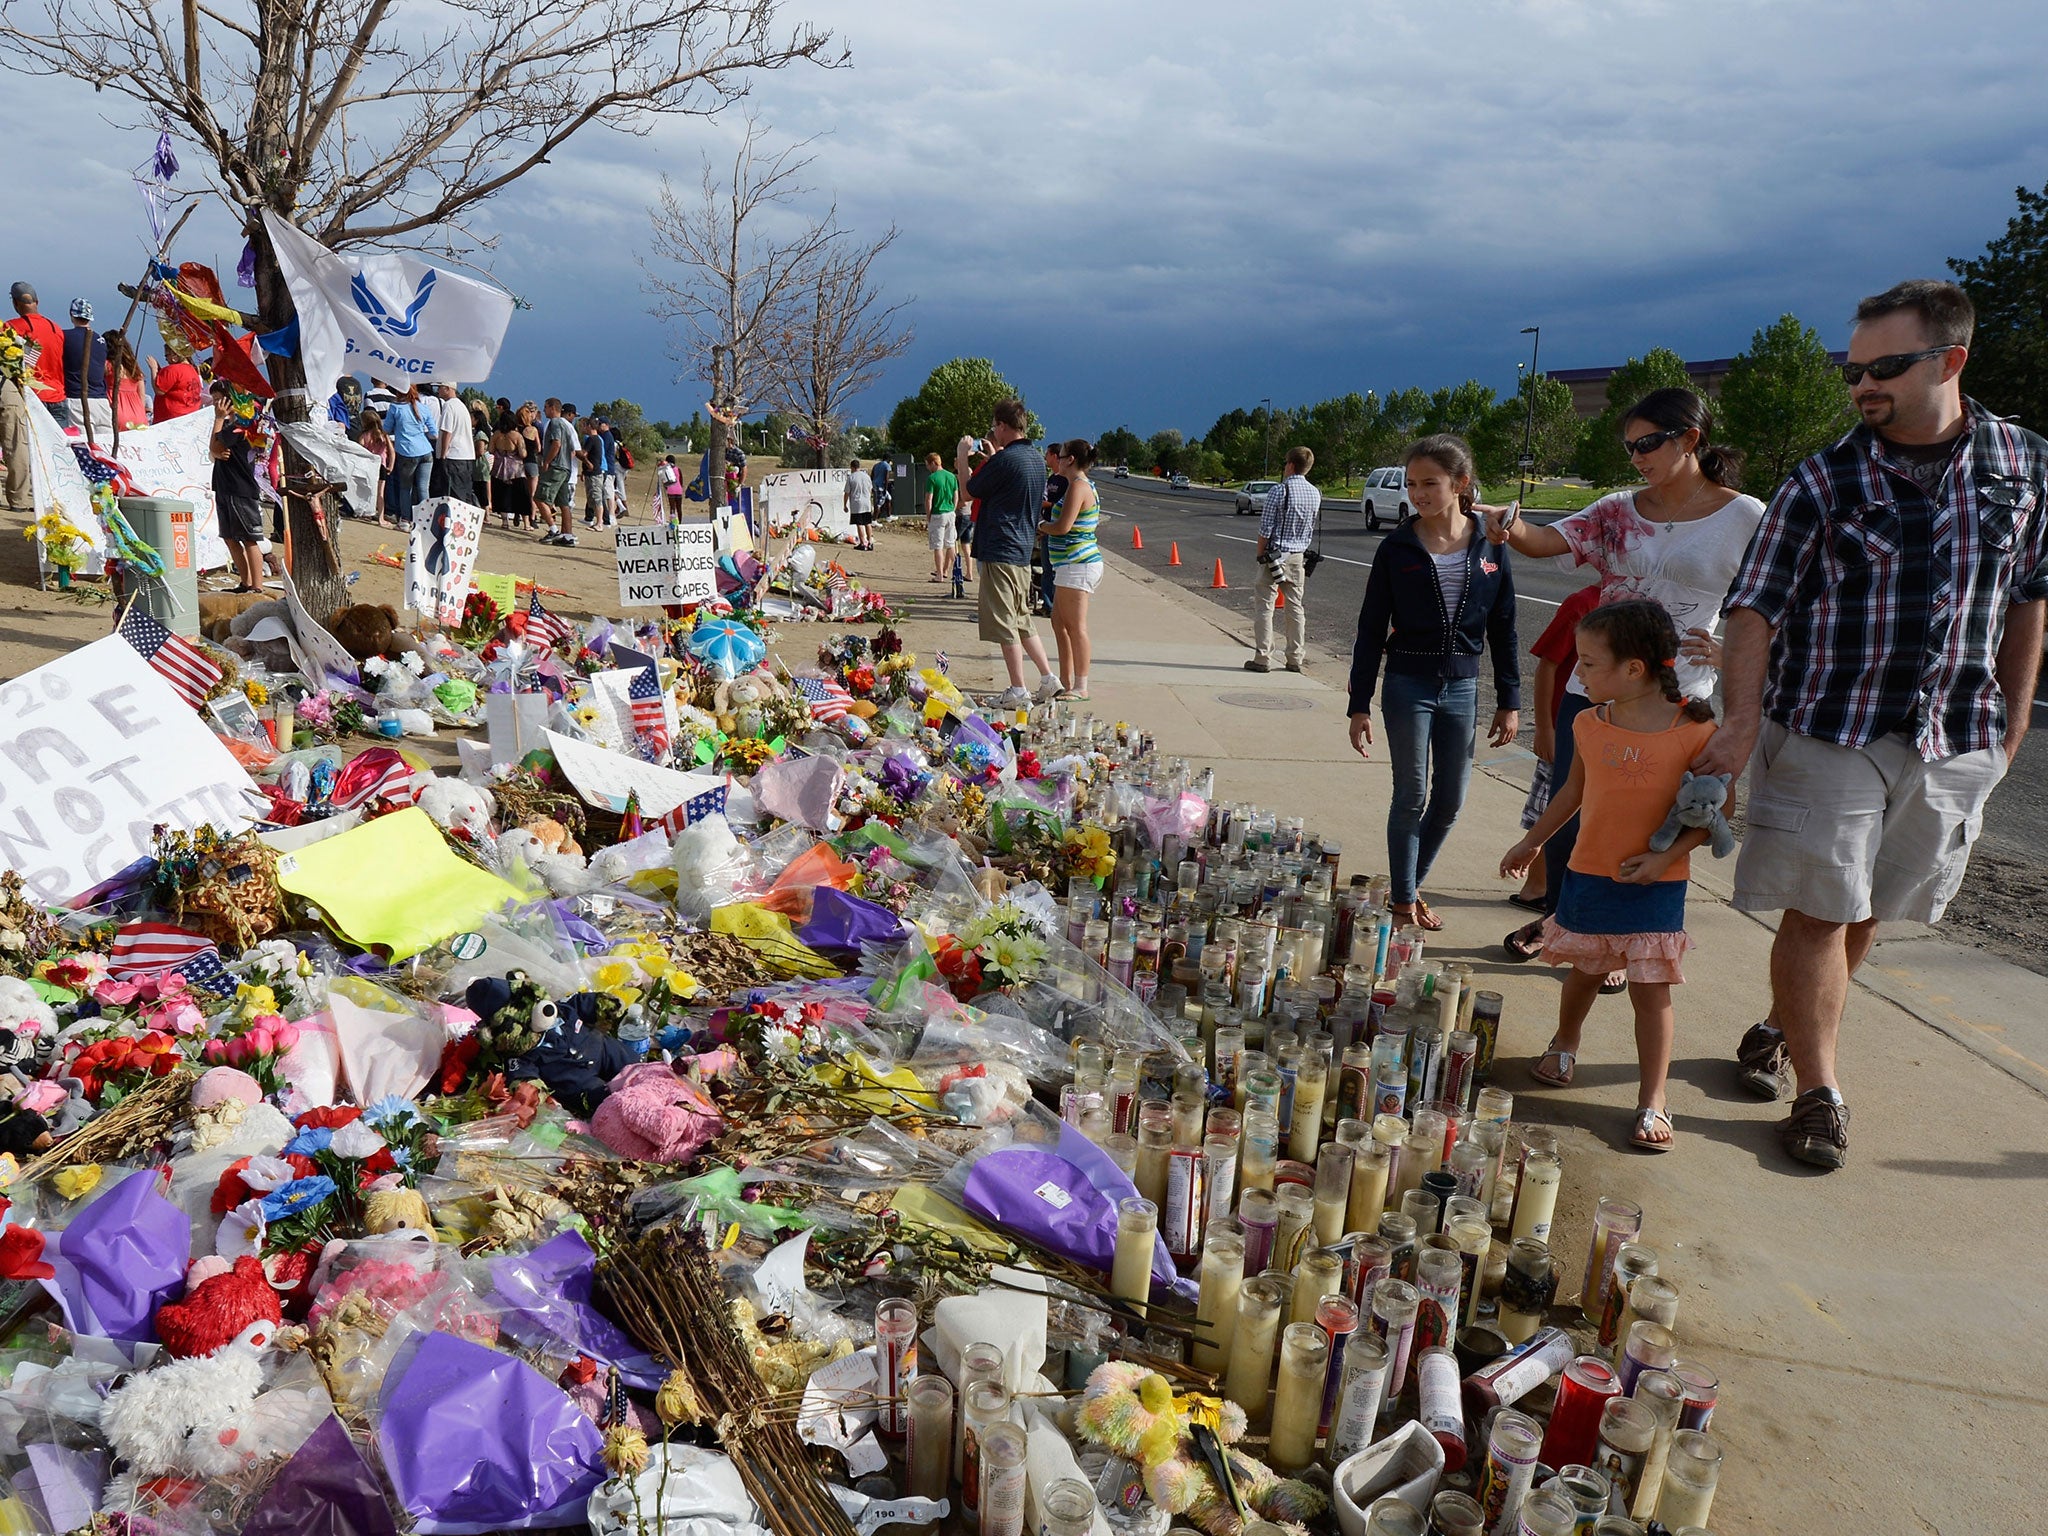 A roadside memorial set up for victims of the Colorado theater shooting massacre across the street from Century 16 movie theater July 29, 2012 in Aurora, Colorado.